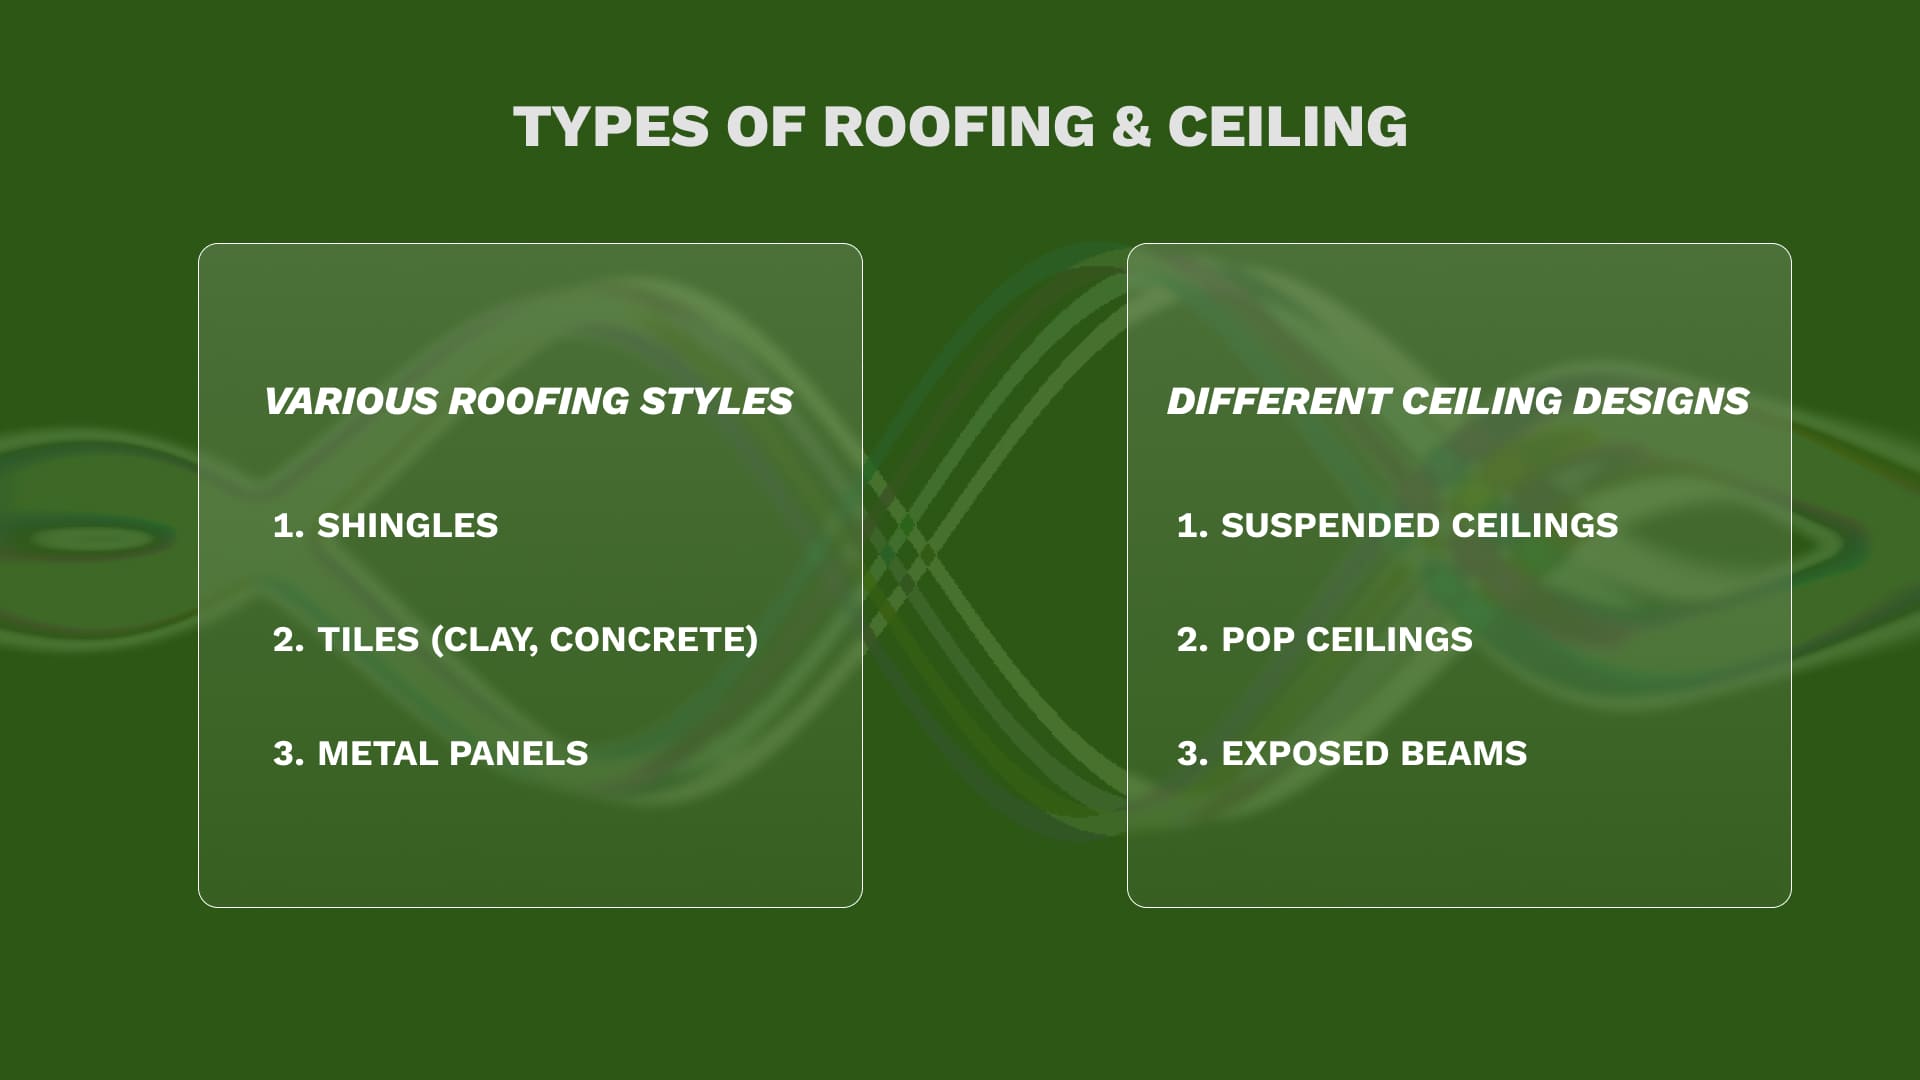 Types of Roofing and Ceiling